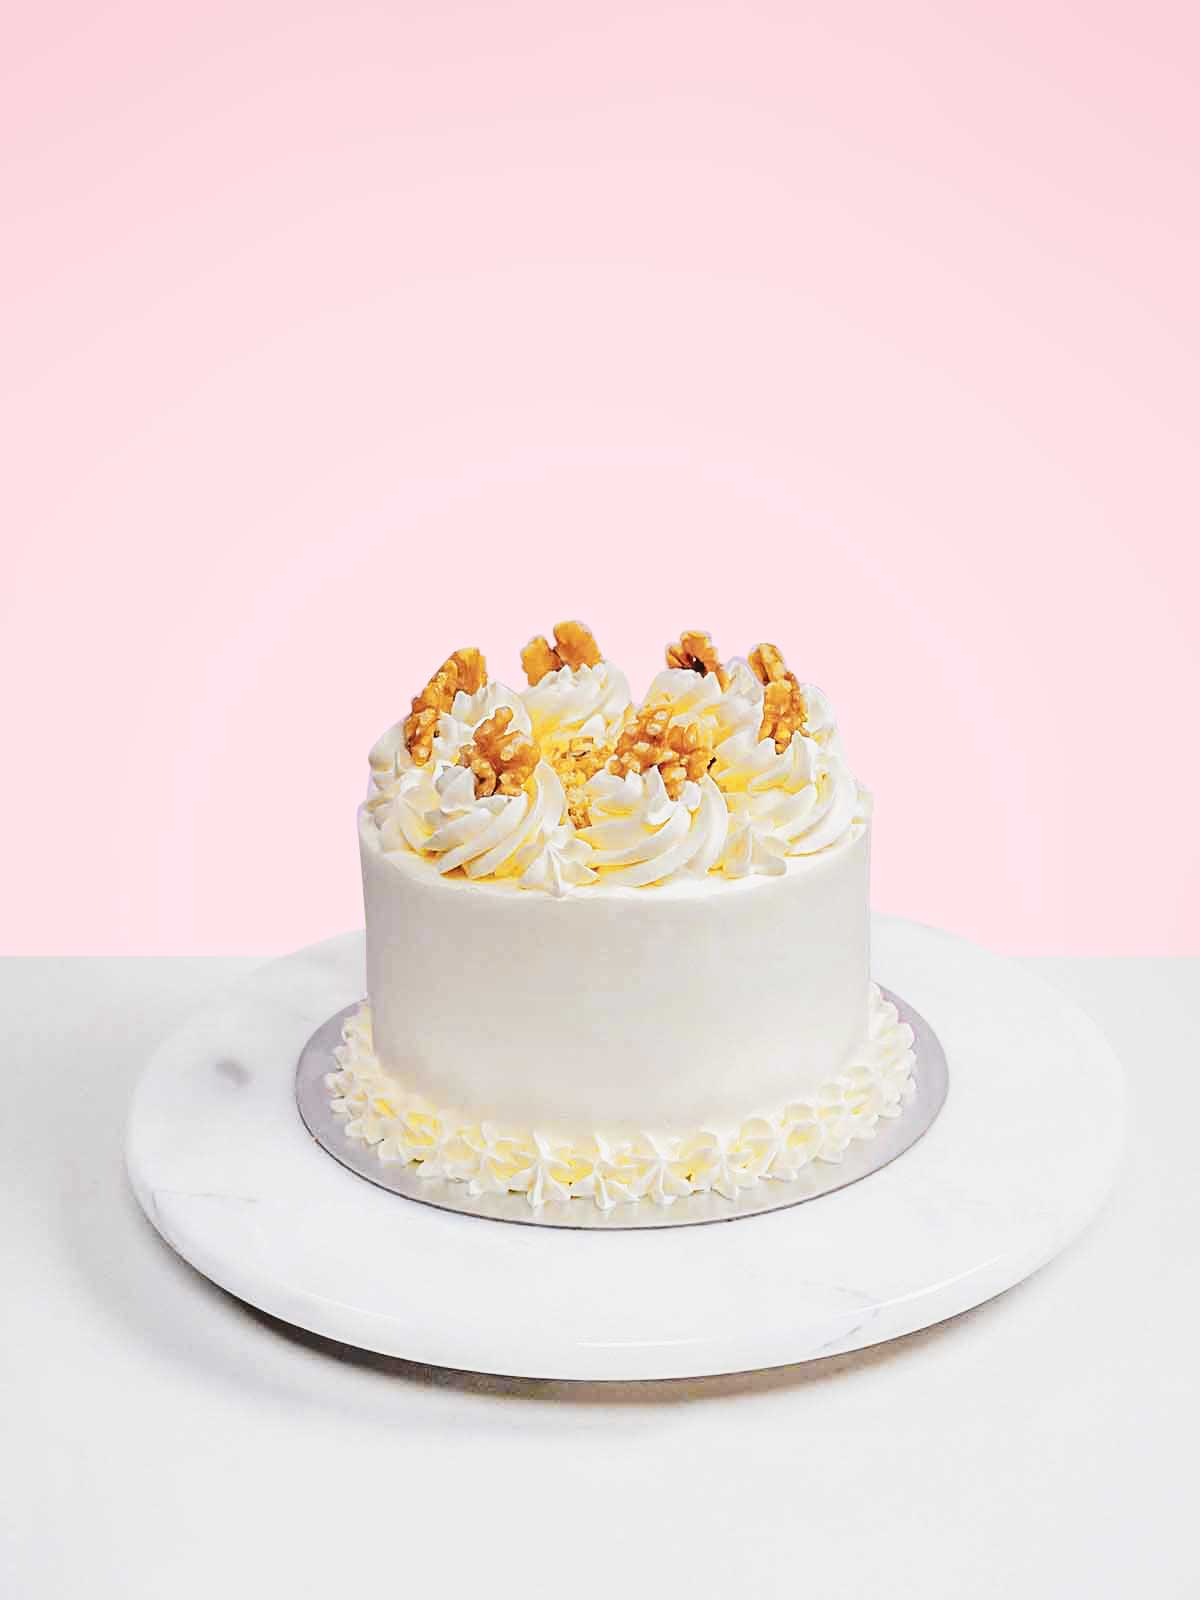 American Chocolate Walnut Cake | Eat Cake Today | Online Cake Delivery